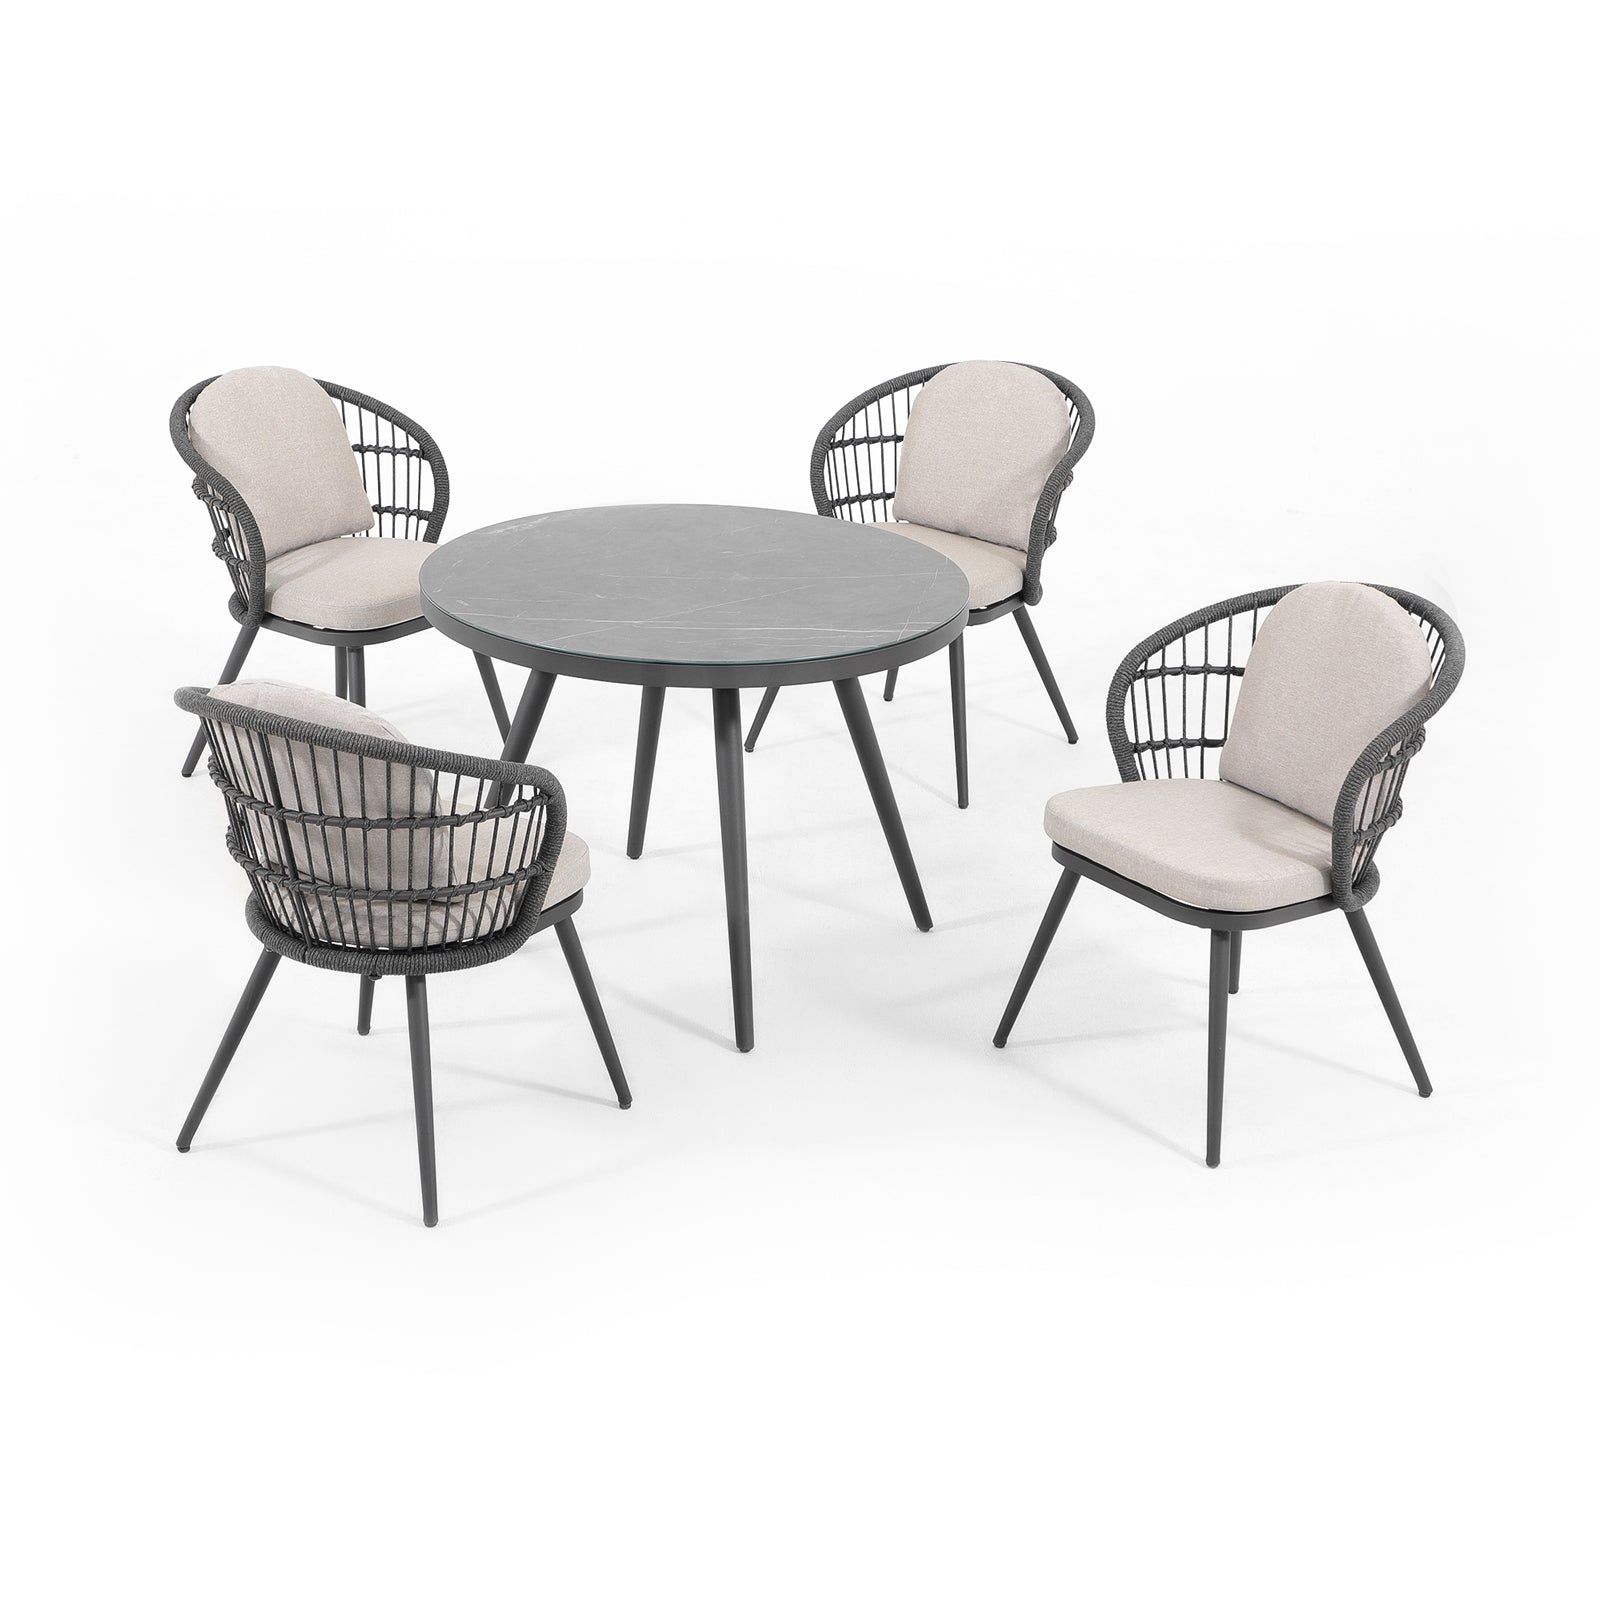 Comino Modern Rope Outdoor Furniture, dark grey aluminum frame outdoor Dining Set with light grey cushions, 4 dining seats with rope design, 1 round dining table with glass top- Jardina Furniture